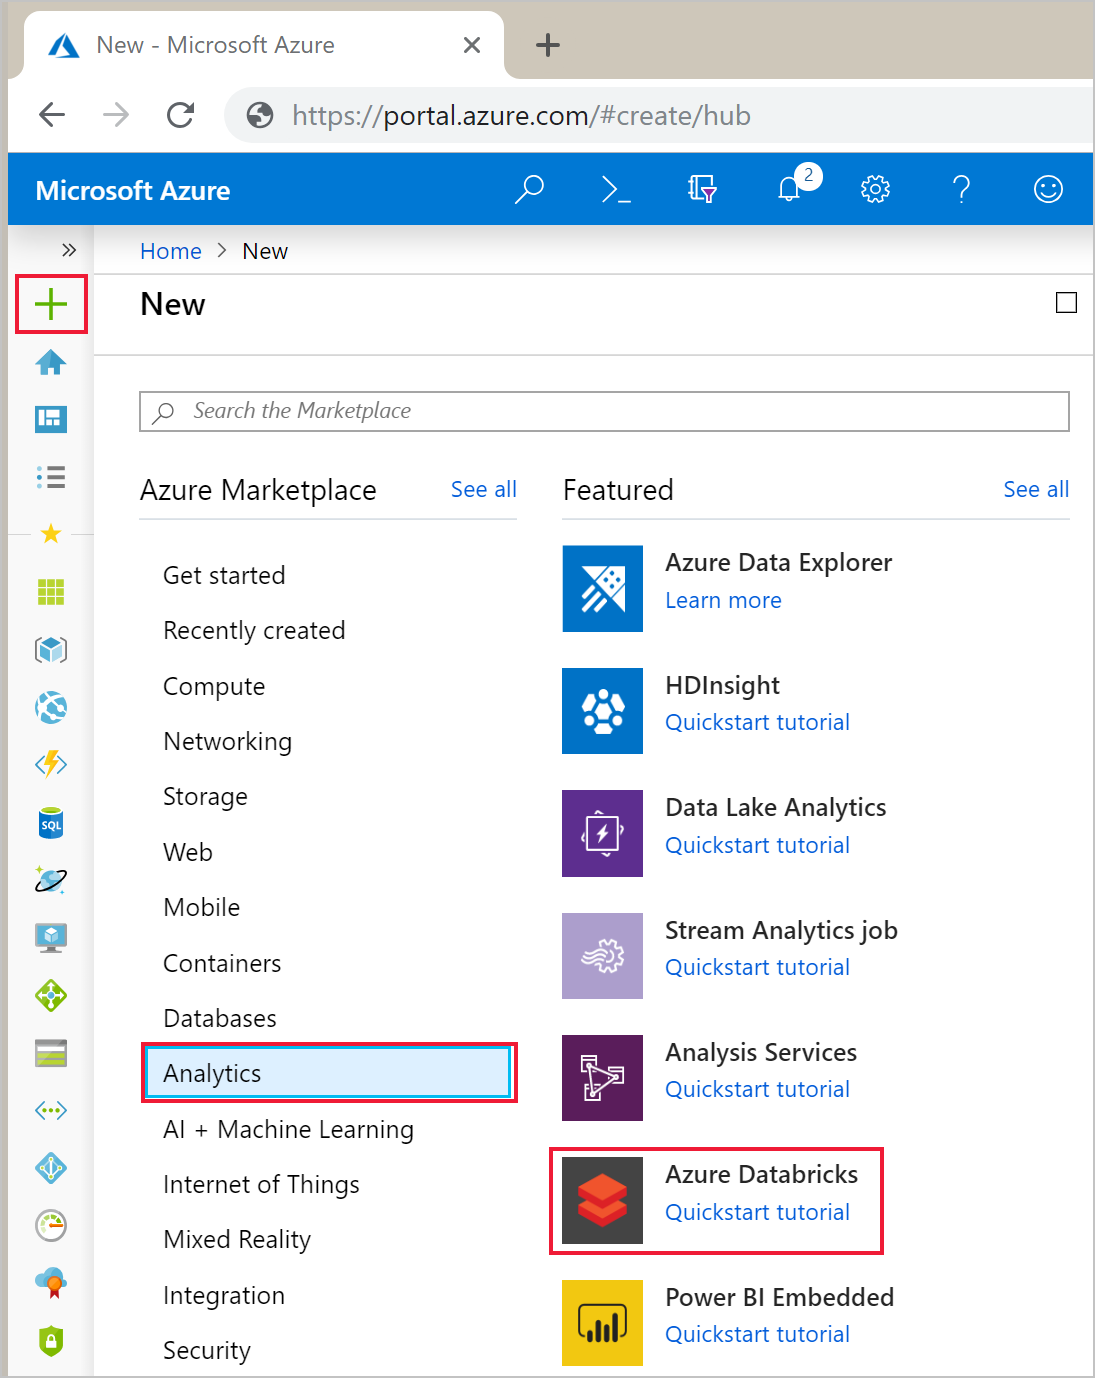 M&@ New - Microsoft Azure x +

€ C @ hittps://portal.azure.com/#create/hub
Microsoft Azure yo) >» ly e & 2 S)
» Home > New

New im

2 Search the Marketplace

Azure Marketplace Seeall Featured See all

Get started %~ Azure Data Explorer
Vx Learn more

Recently created

@

= Compute HDInsight

(@ . .

a . Quickstart tutorial
Networking
Storage Data Lake Analytics
Web Quickstart tutorial
Mobile

Stream Analytics job

Containers Quickstart tutorial

4

Databases

> Een
nalytics me Quickstart tutorial

Al + Machine Learning

Azure Databricks

Internet of Things
Quickstart tutorial
Mixed Reality

Integration Power BI Embedded

Quickstart tutorial

@esOeotc Ho eva s

Security